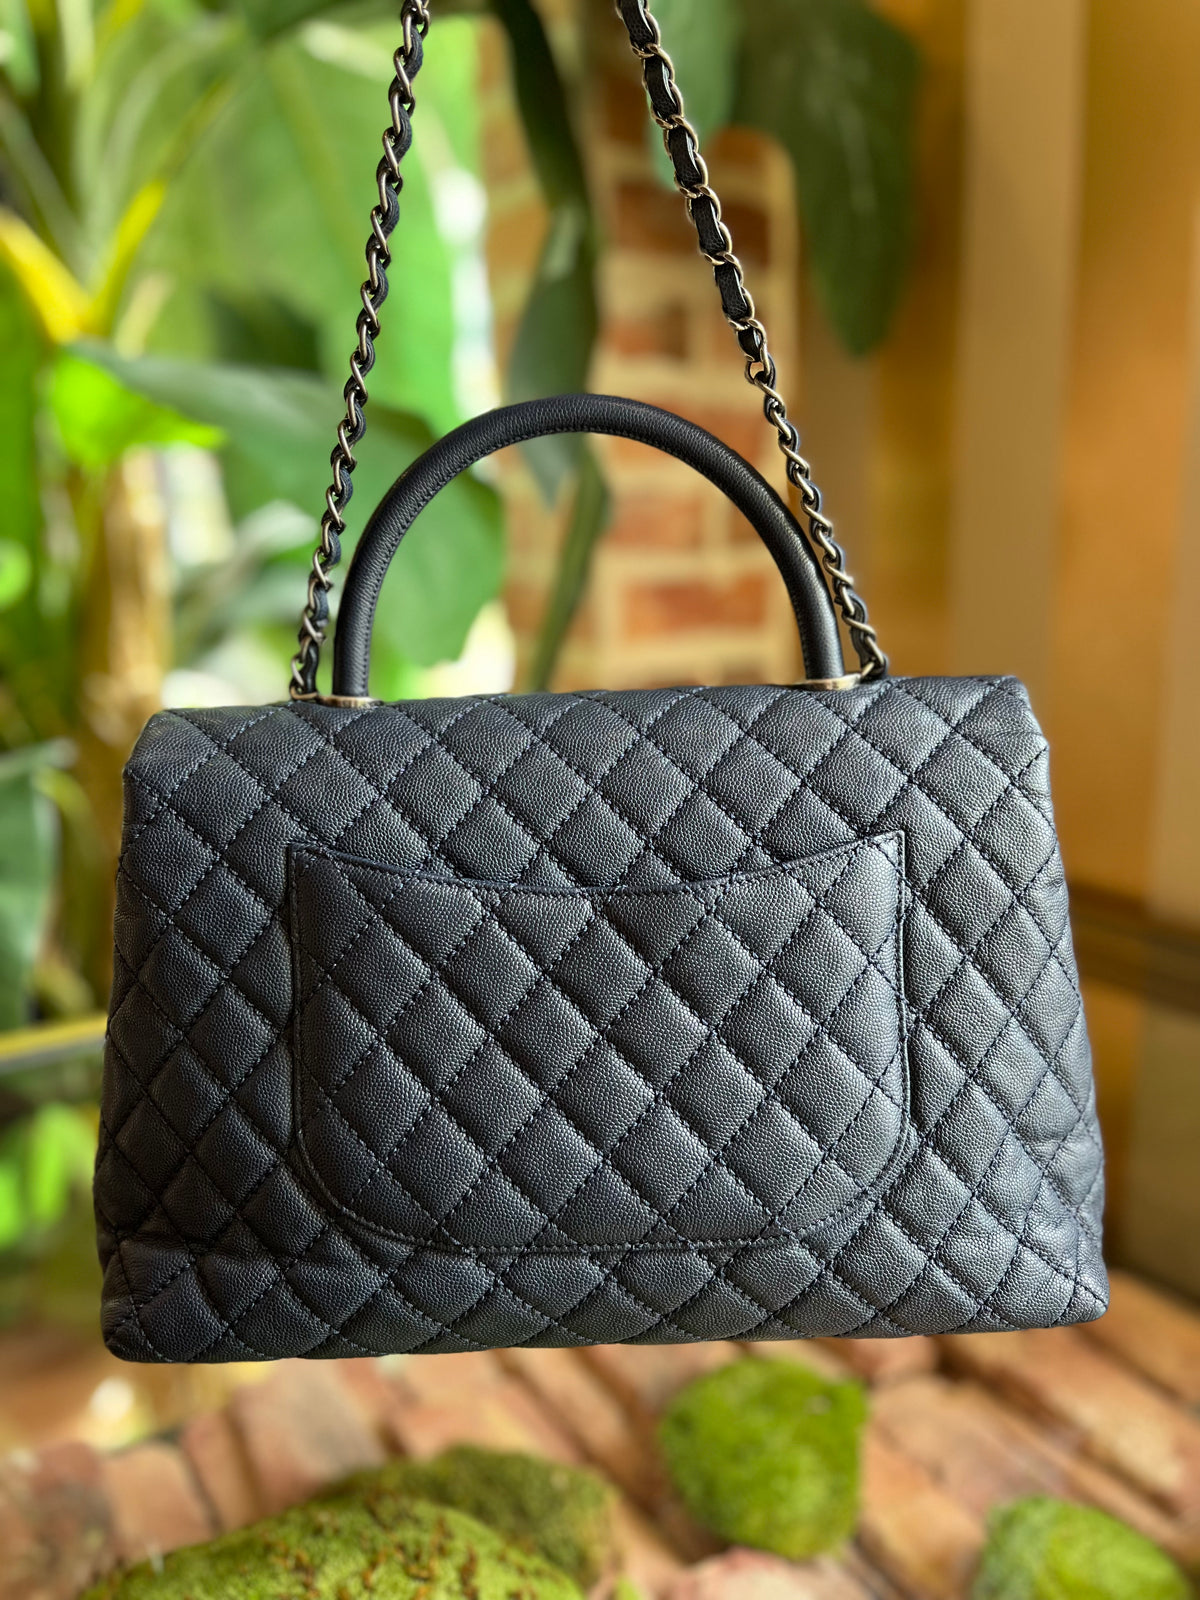 CHANEL Navy Blue Caviar Quilted Leather Large Coco Top Handle Flap Bag